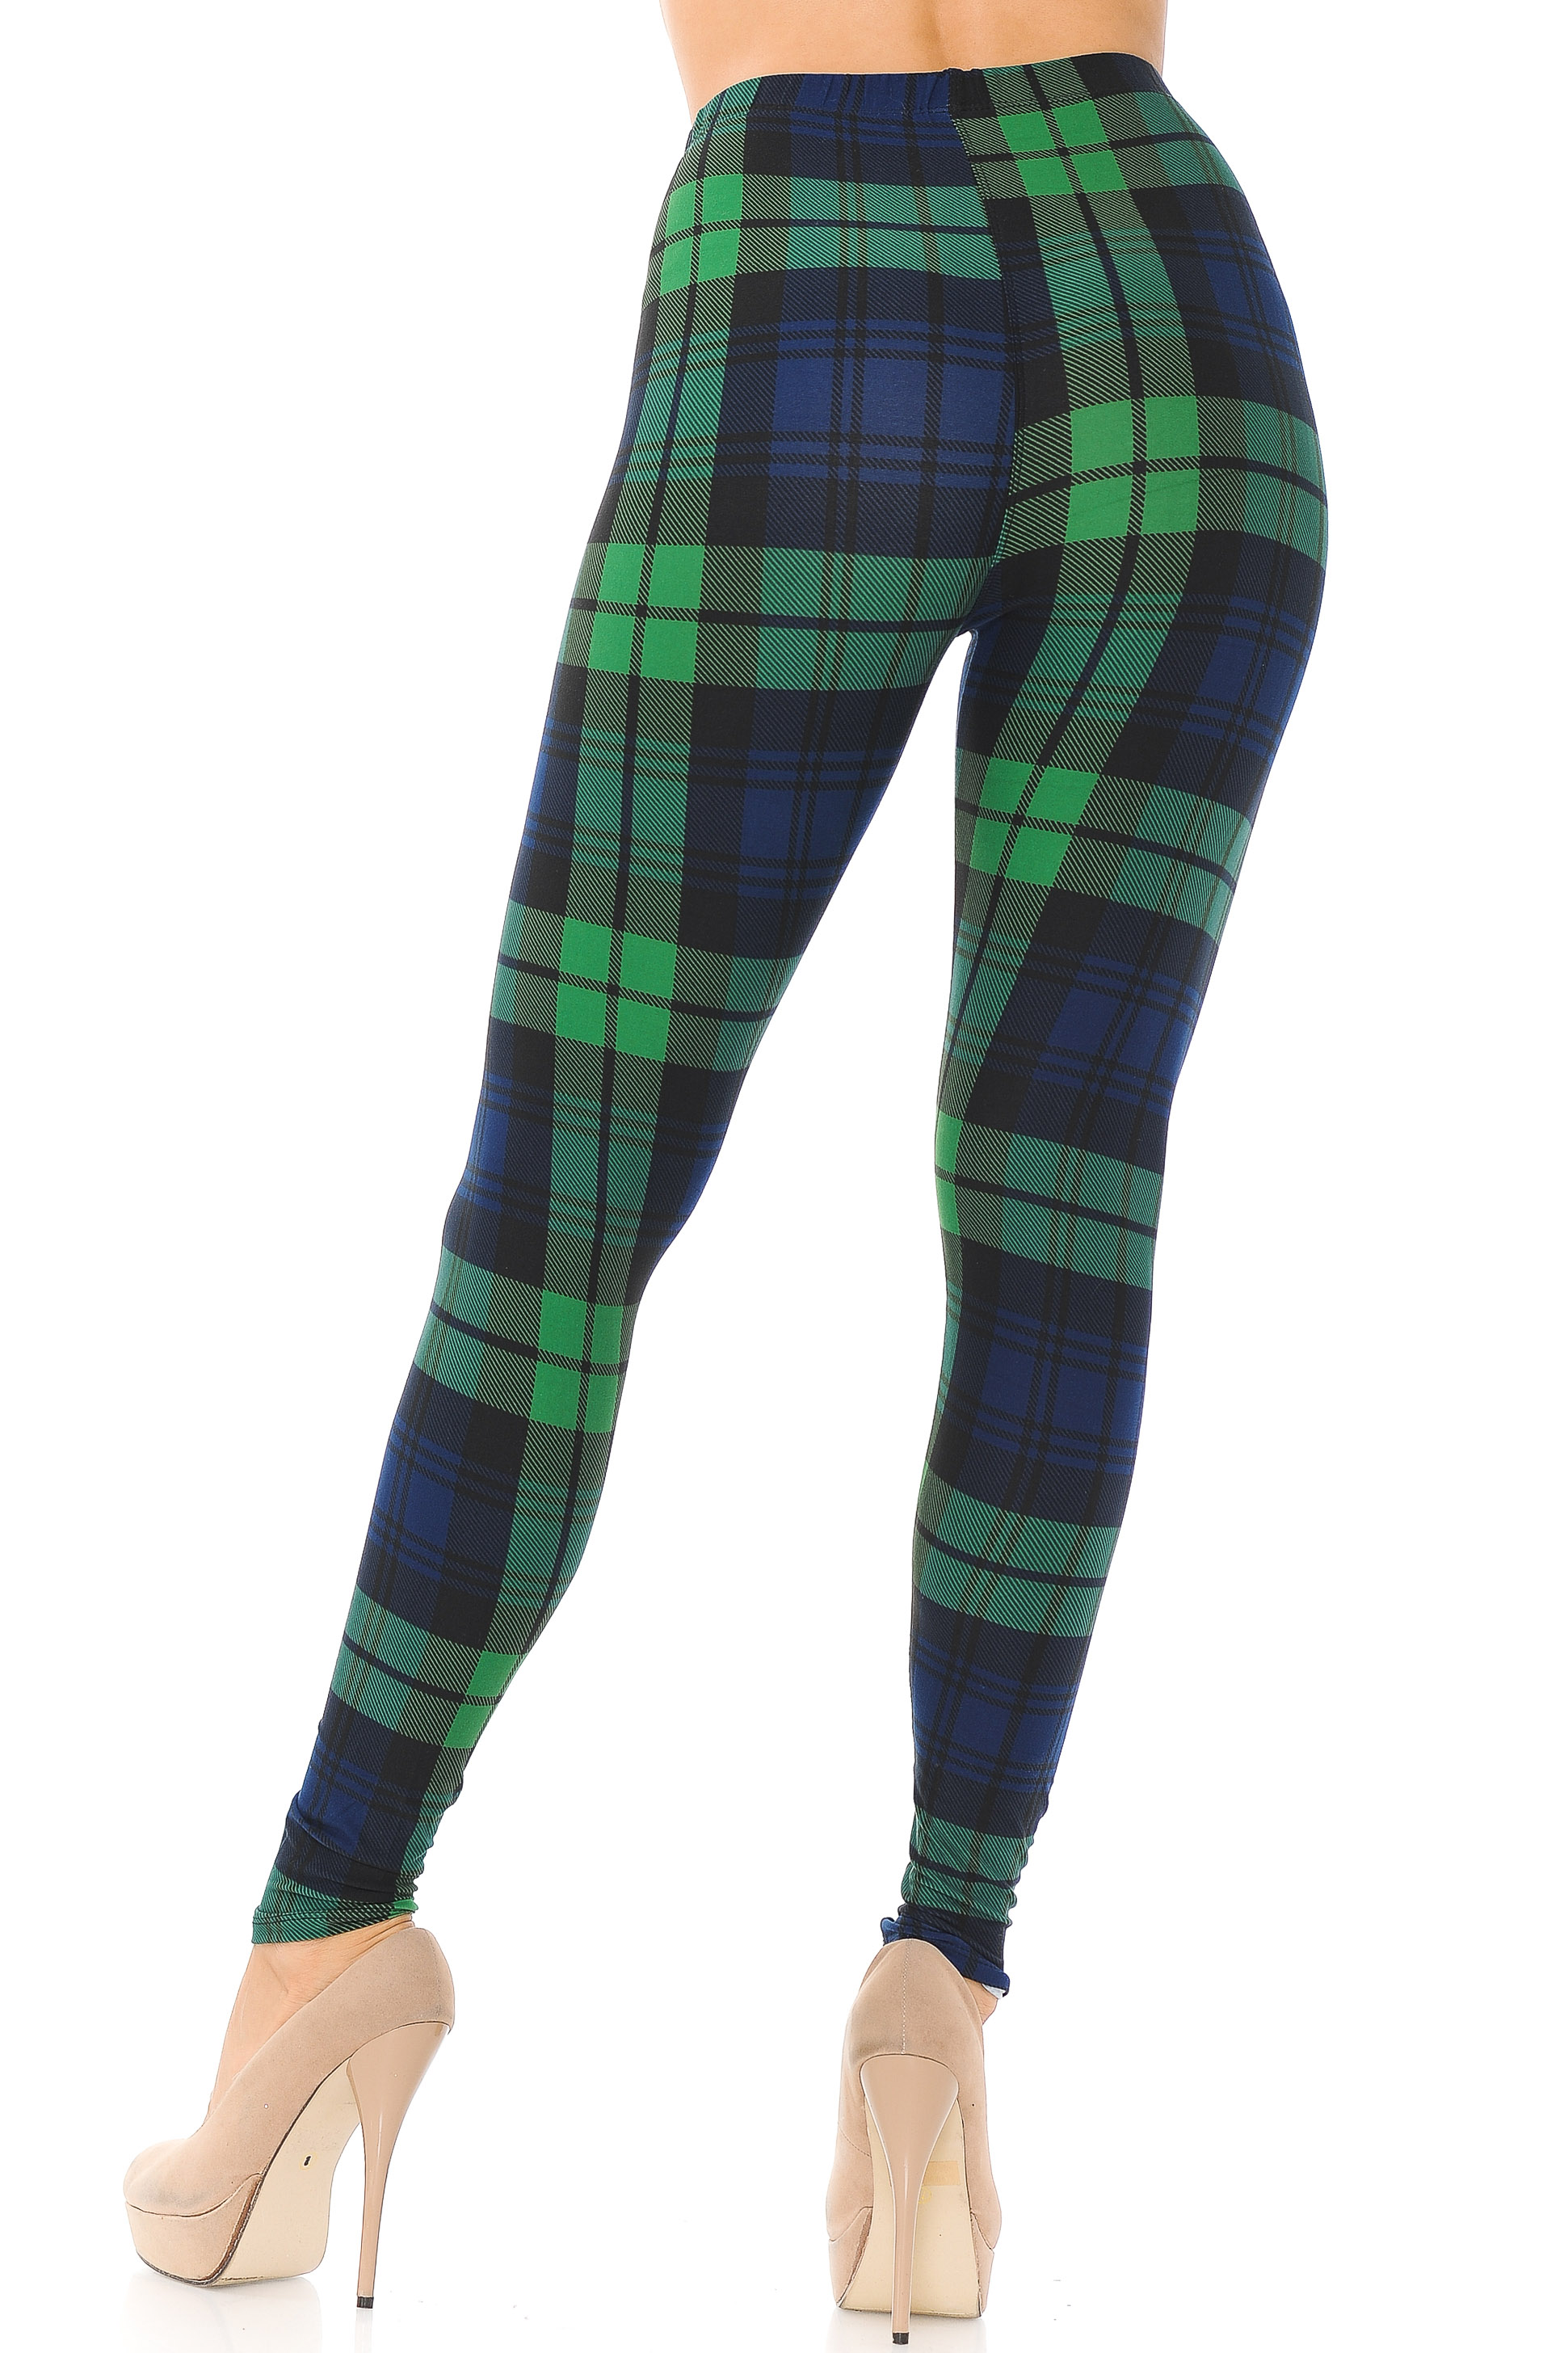 Wholesale Buttery Smooth Green Plaid Leggings